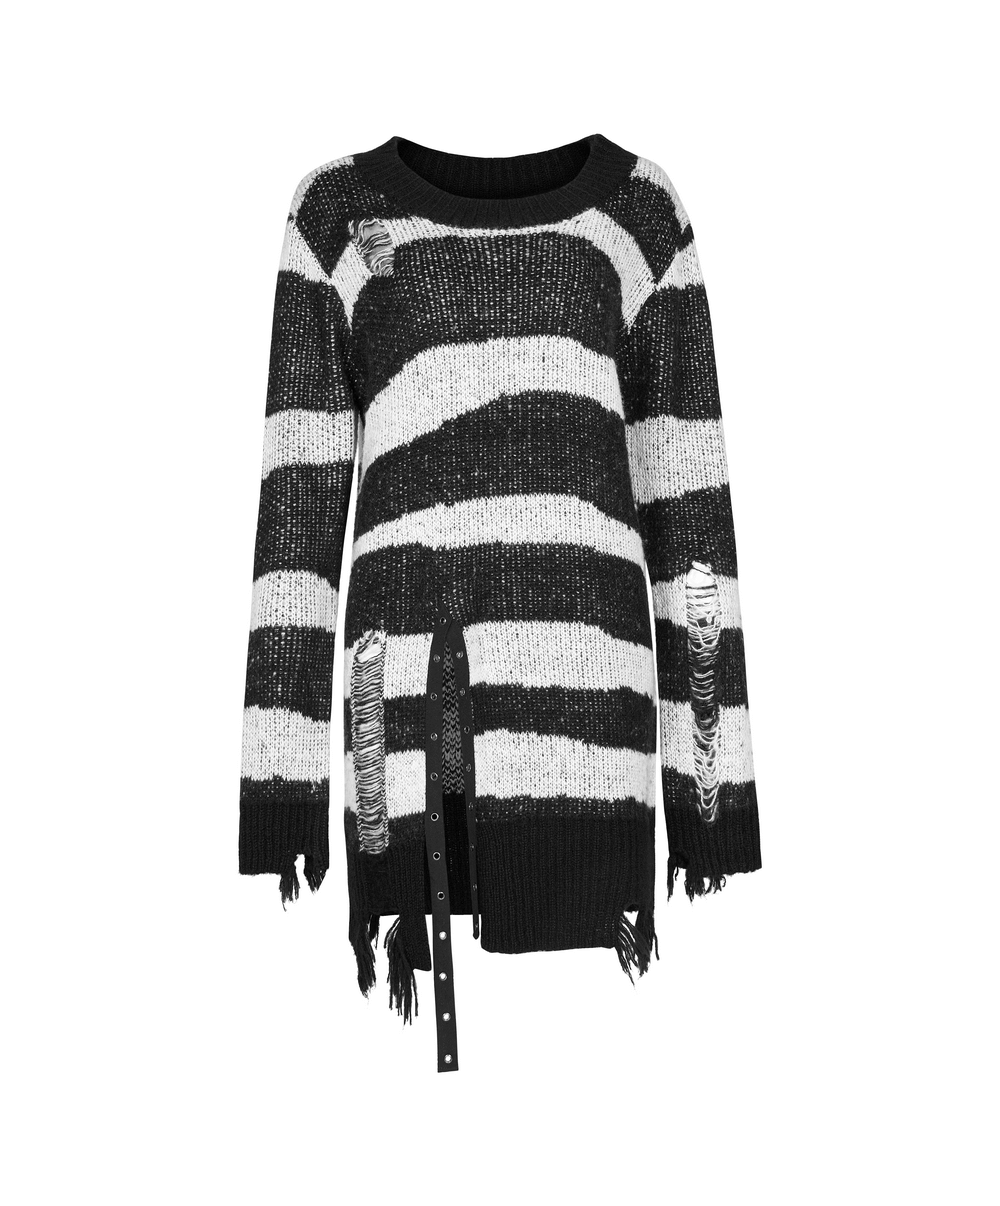 Gothic Black And White Striped Distressed Sweater - HARD'N'HEAVY